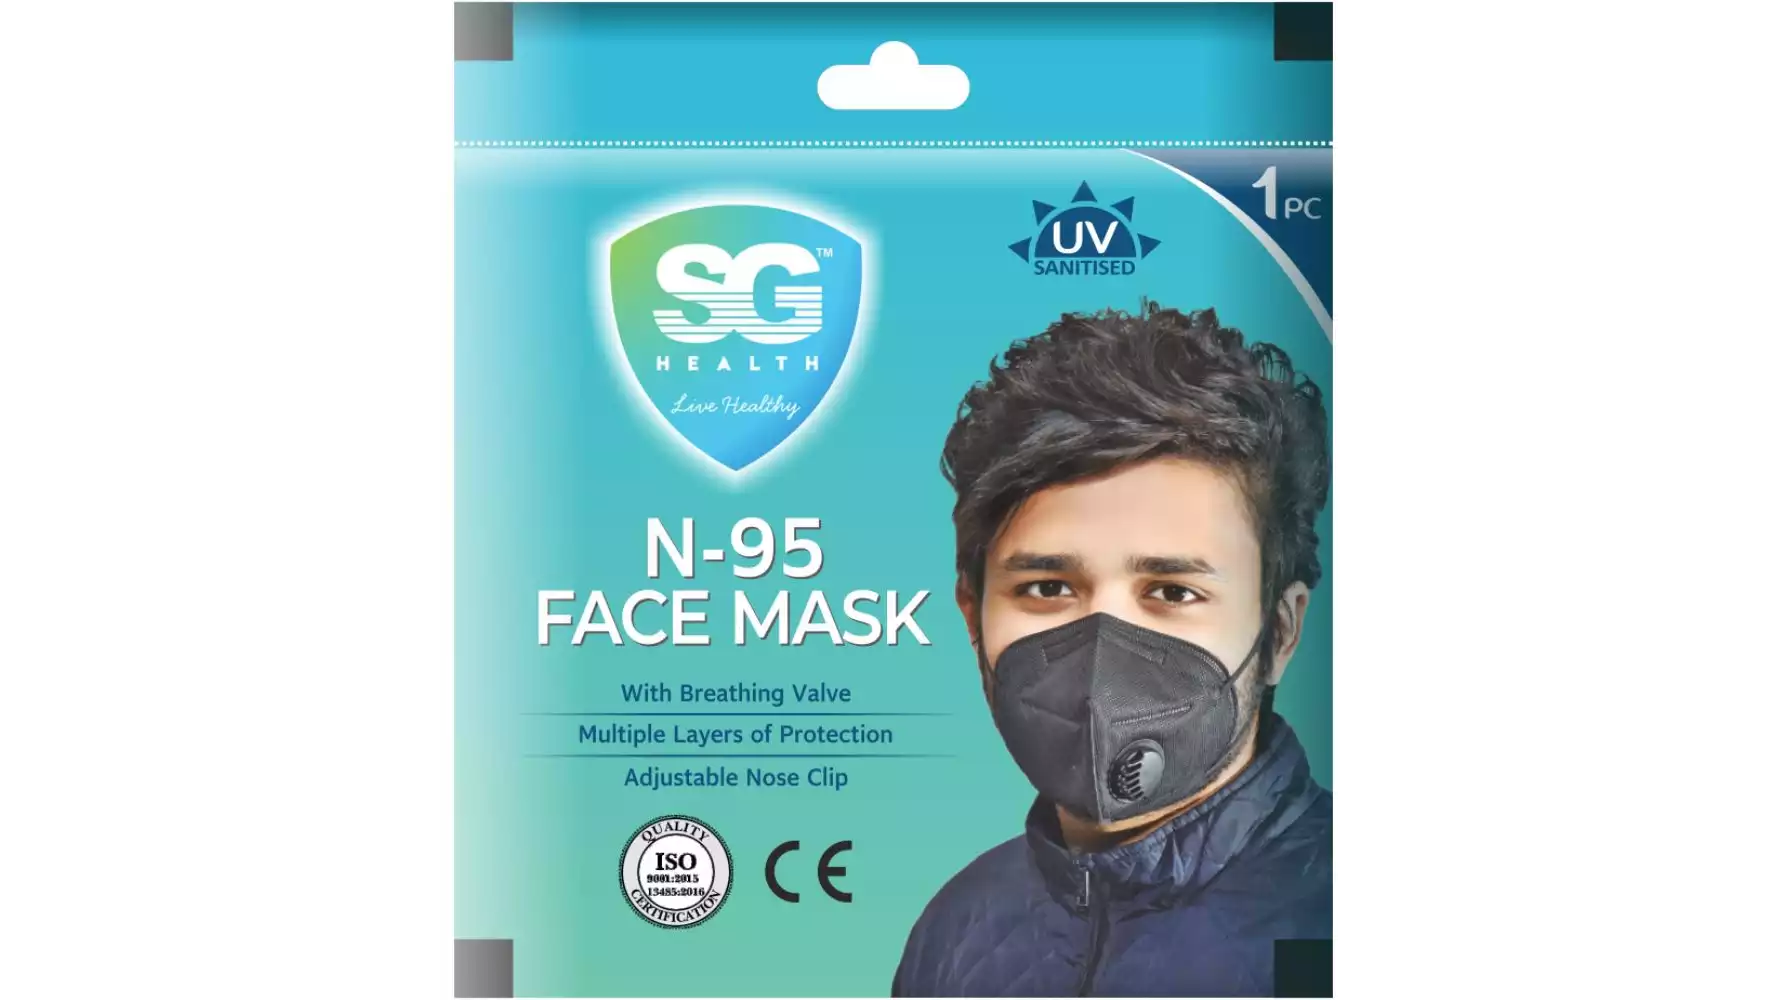 SG Health N95 Face Mask With Valve (1pcs)